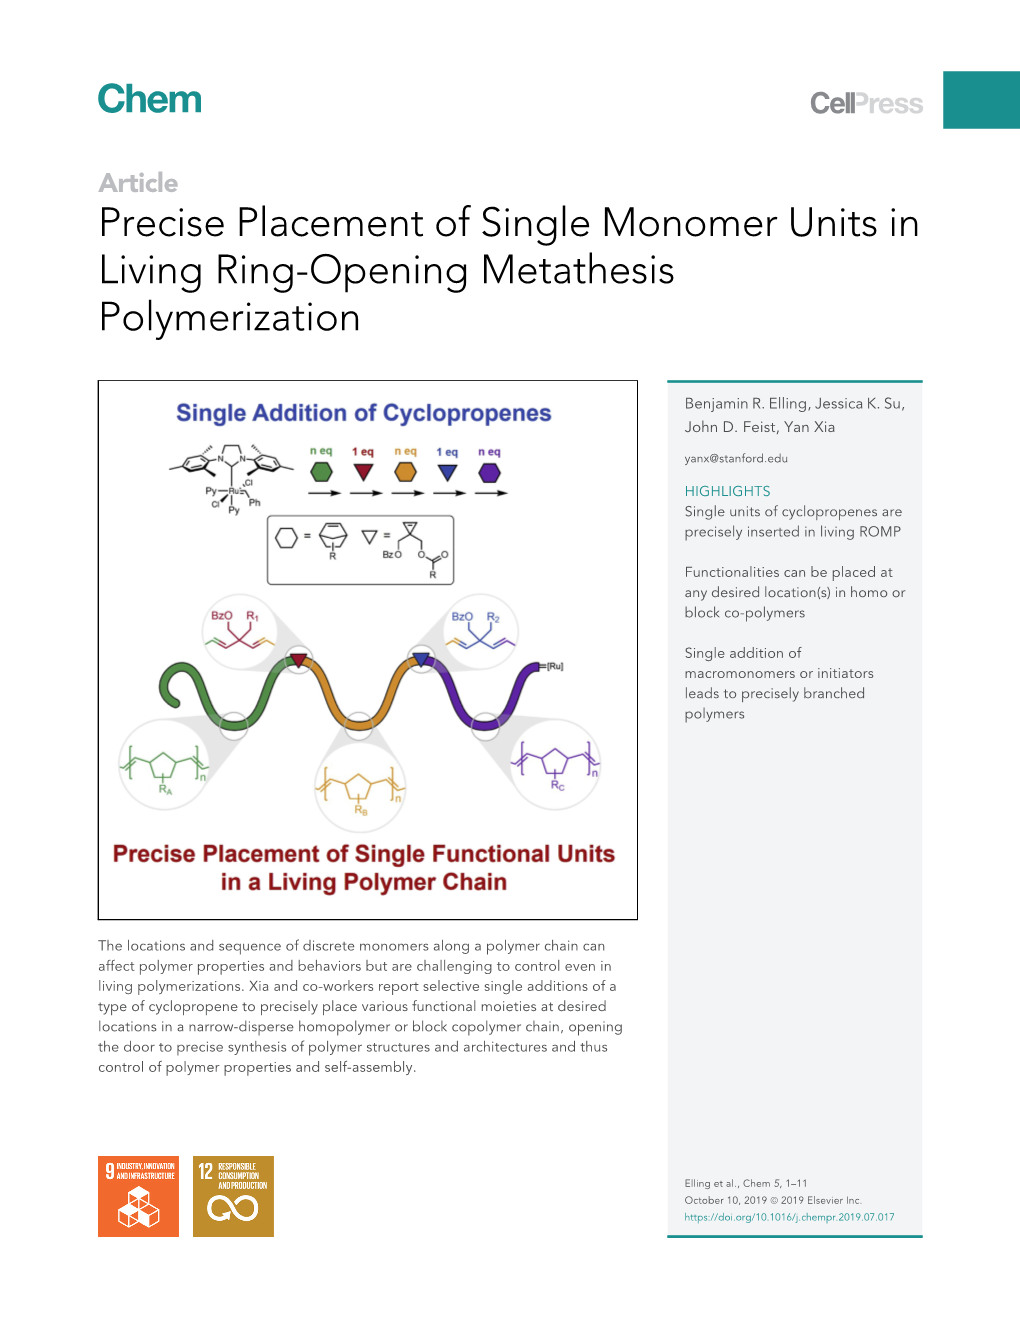 Precise Placement of Single Monomer Units in Living Ring-Opening Metathesis Polymerization